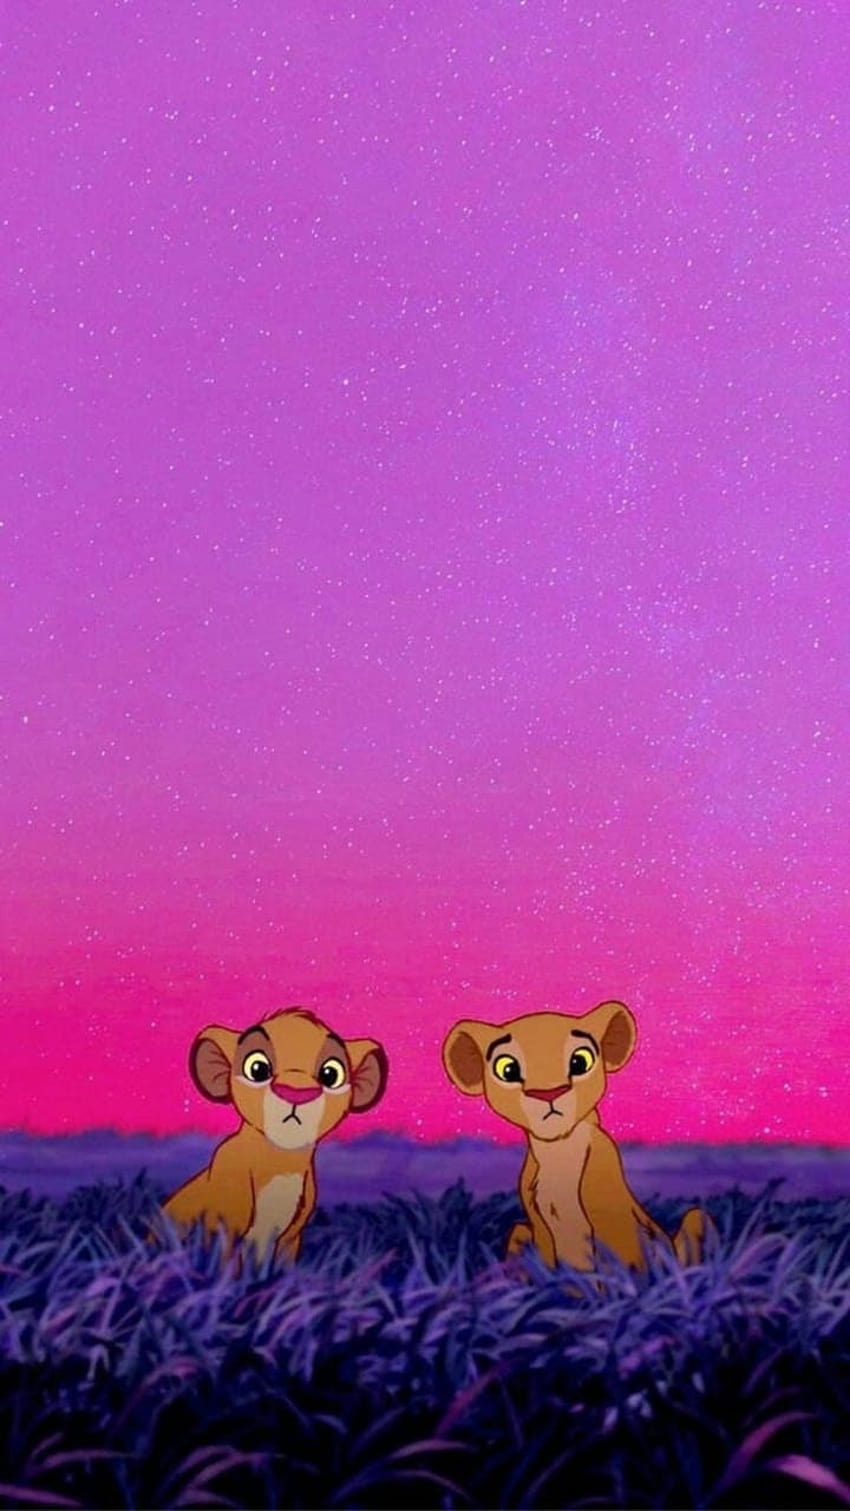 The lion king simba and nala, standing in a field, purple sky in the background, disney wallpaper - The Lion King, lion